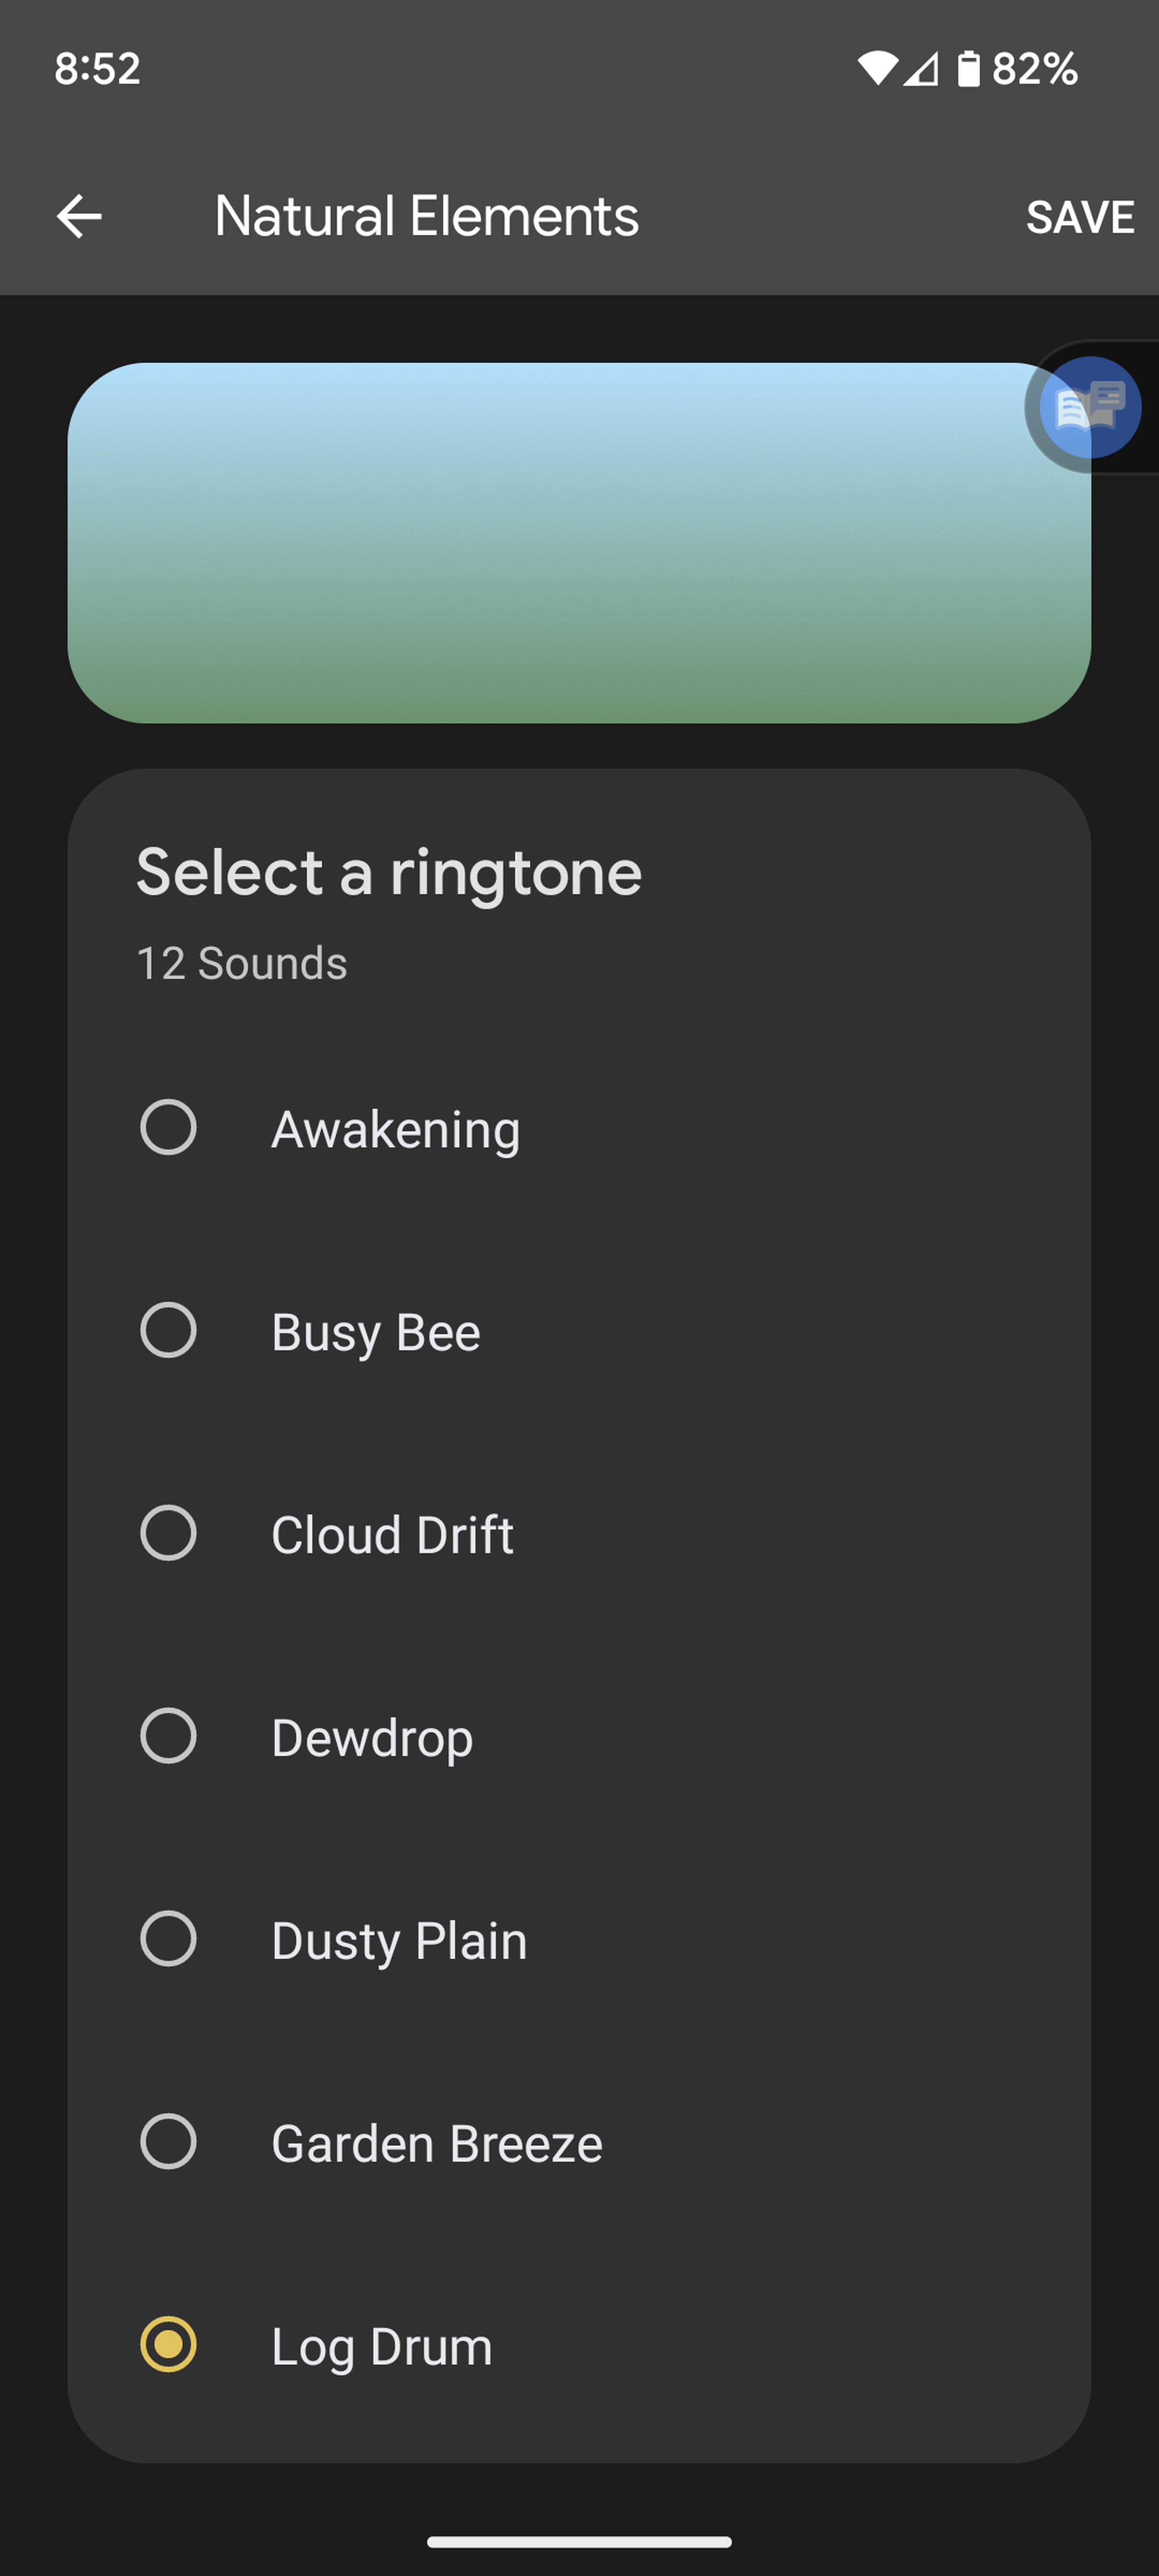 Page headed Select a ringtone and list of 12 sounds.